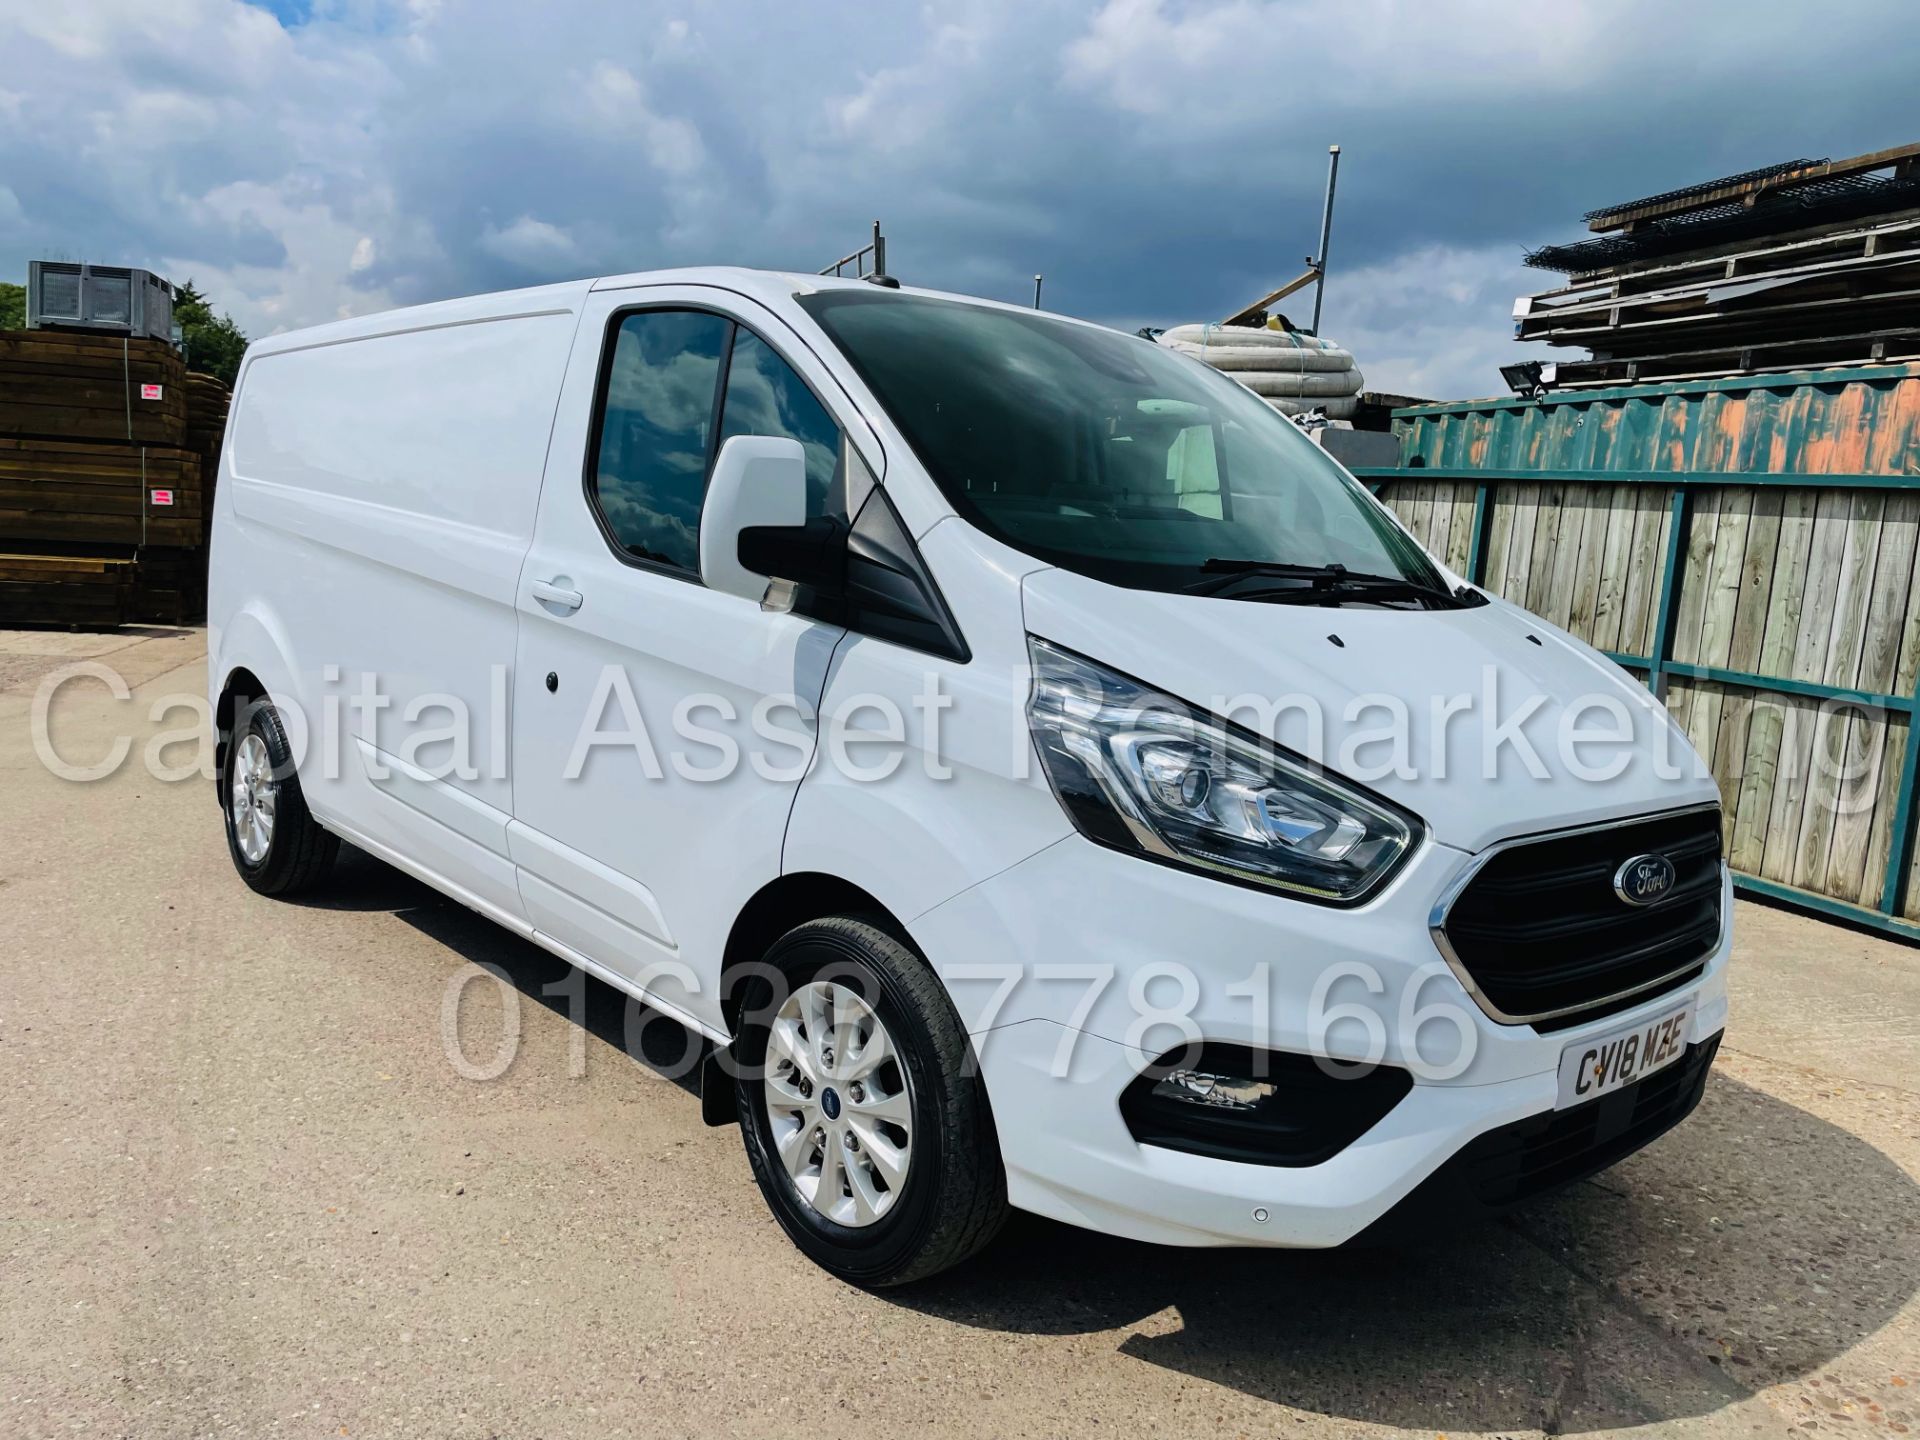 FORD TRANSIT CUSTOM *LIMITED EDITION* PANEL VAN (2018 - NEW MODEL) '2.0 TDCI - EURO 6 - 6 SPEED' - Image 13 of 46